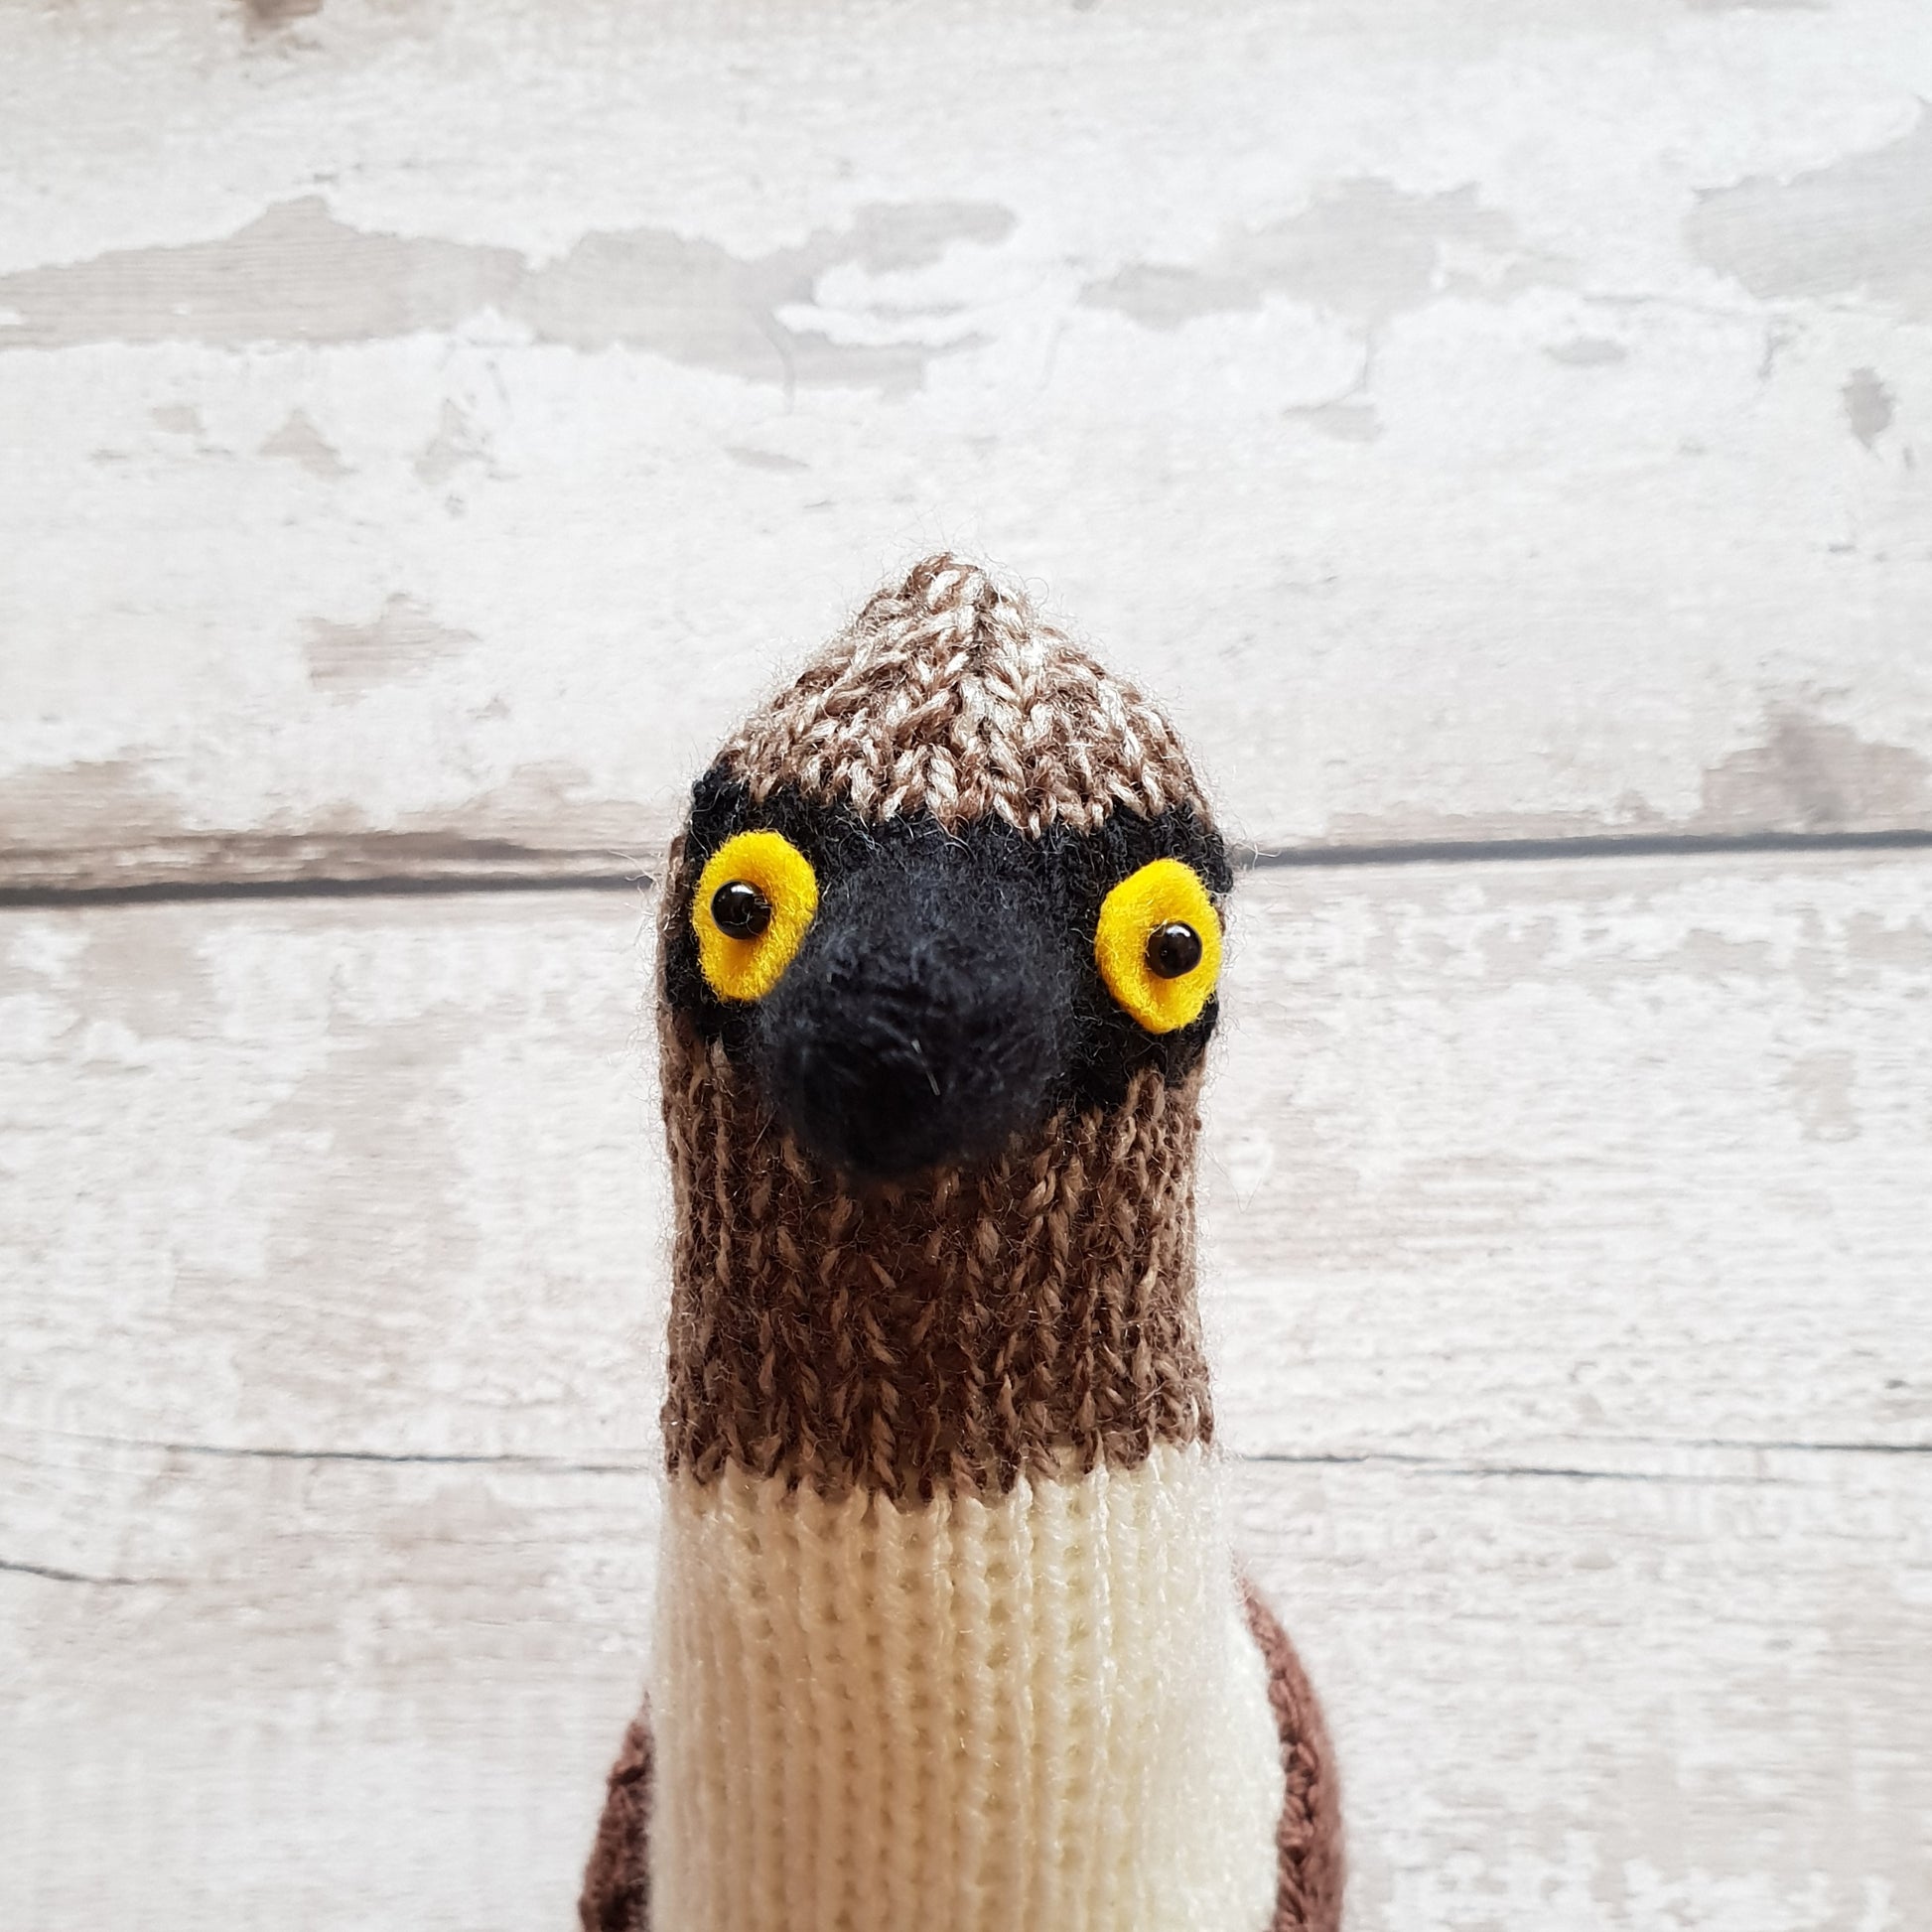 bryan the knitted blue footed booby